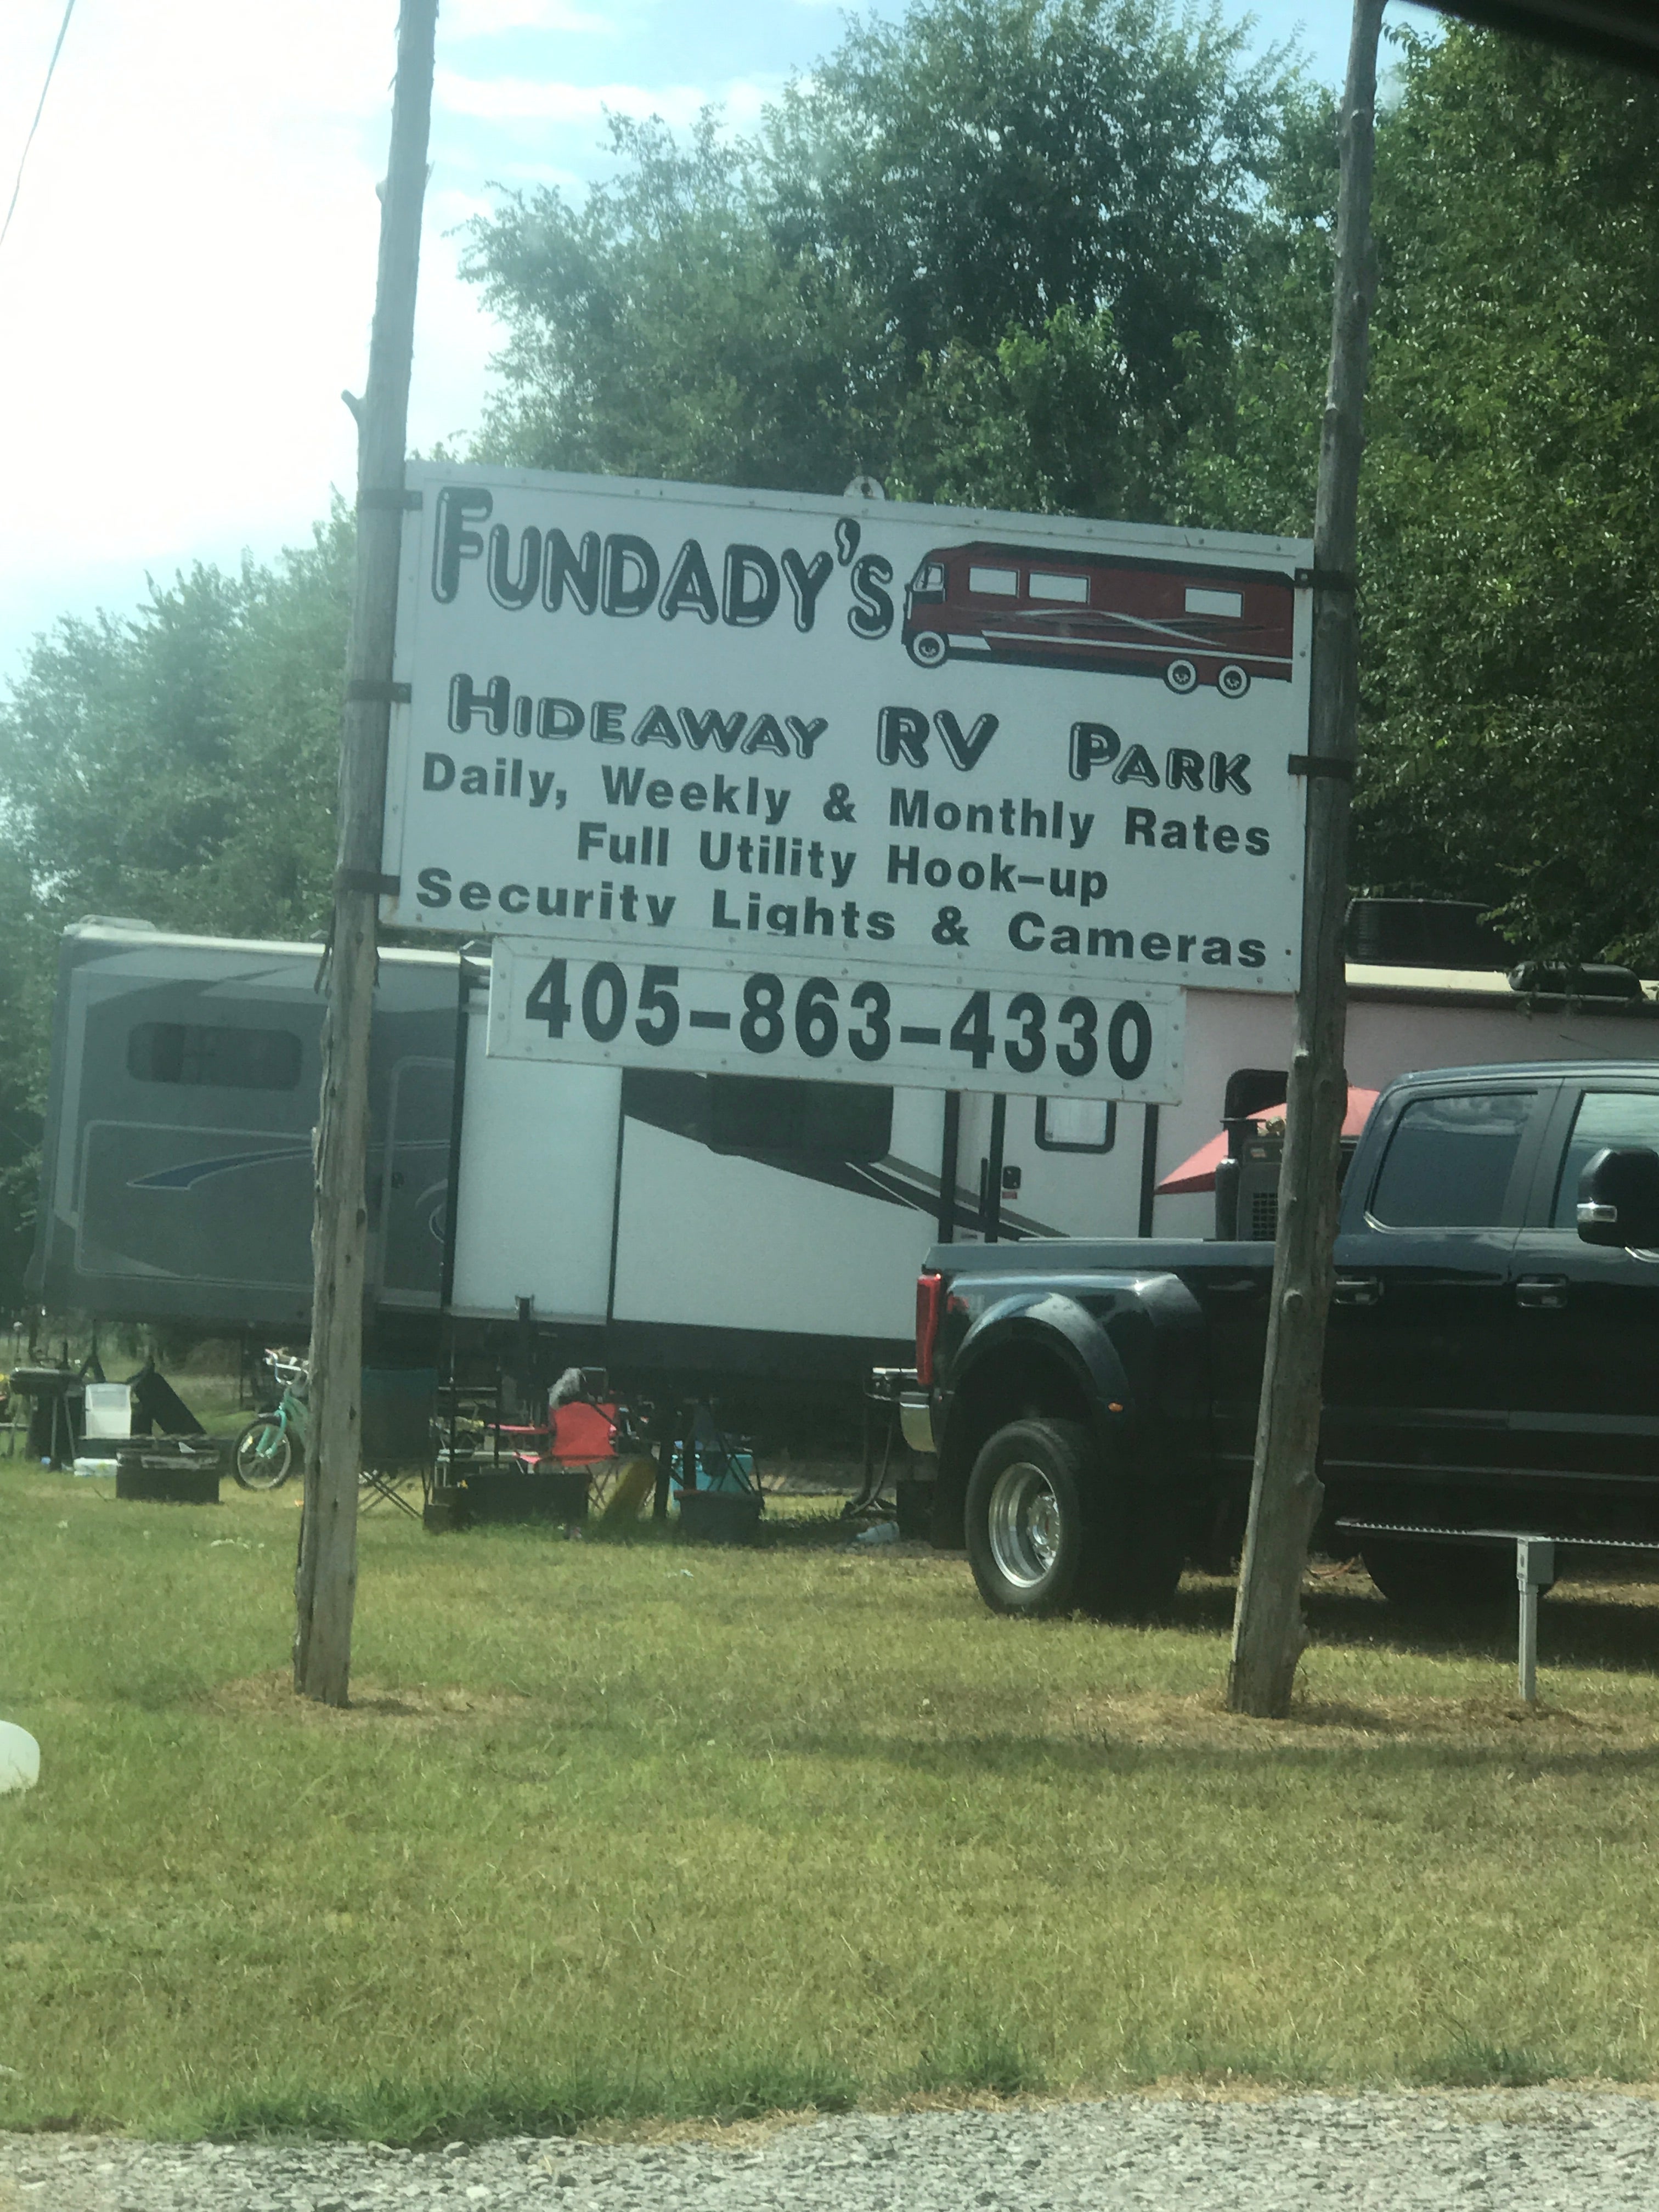 Camper submitted image from Fundady's Hideaway RV Park - 4